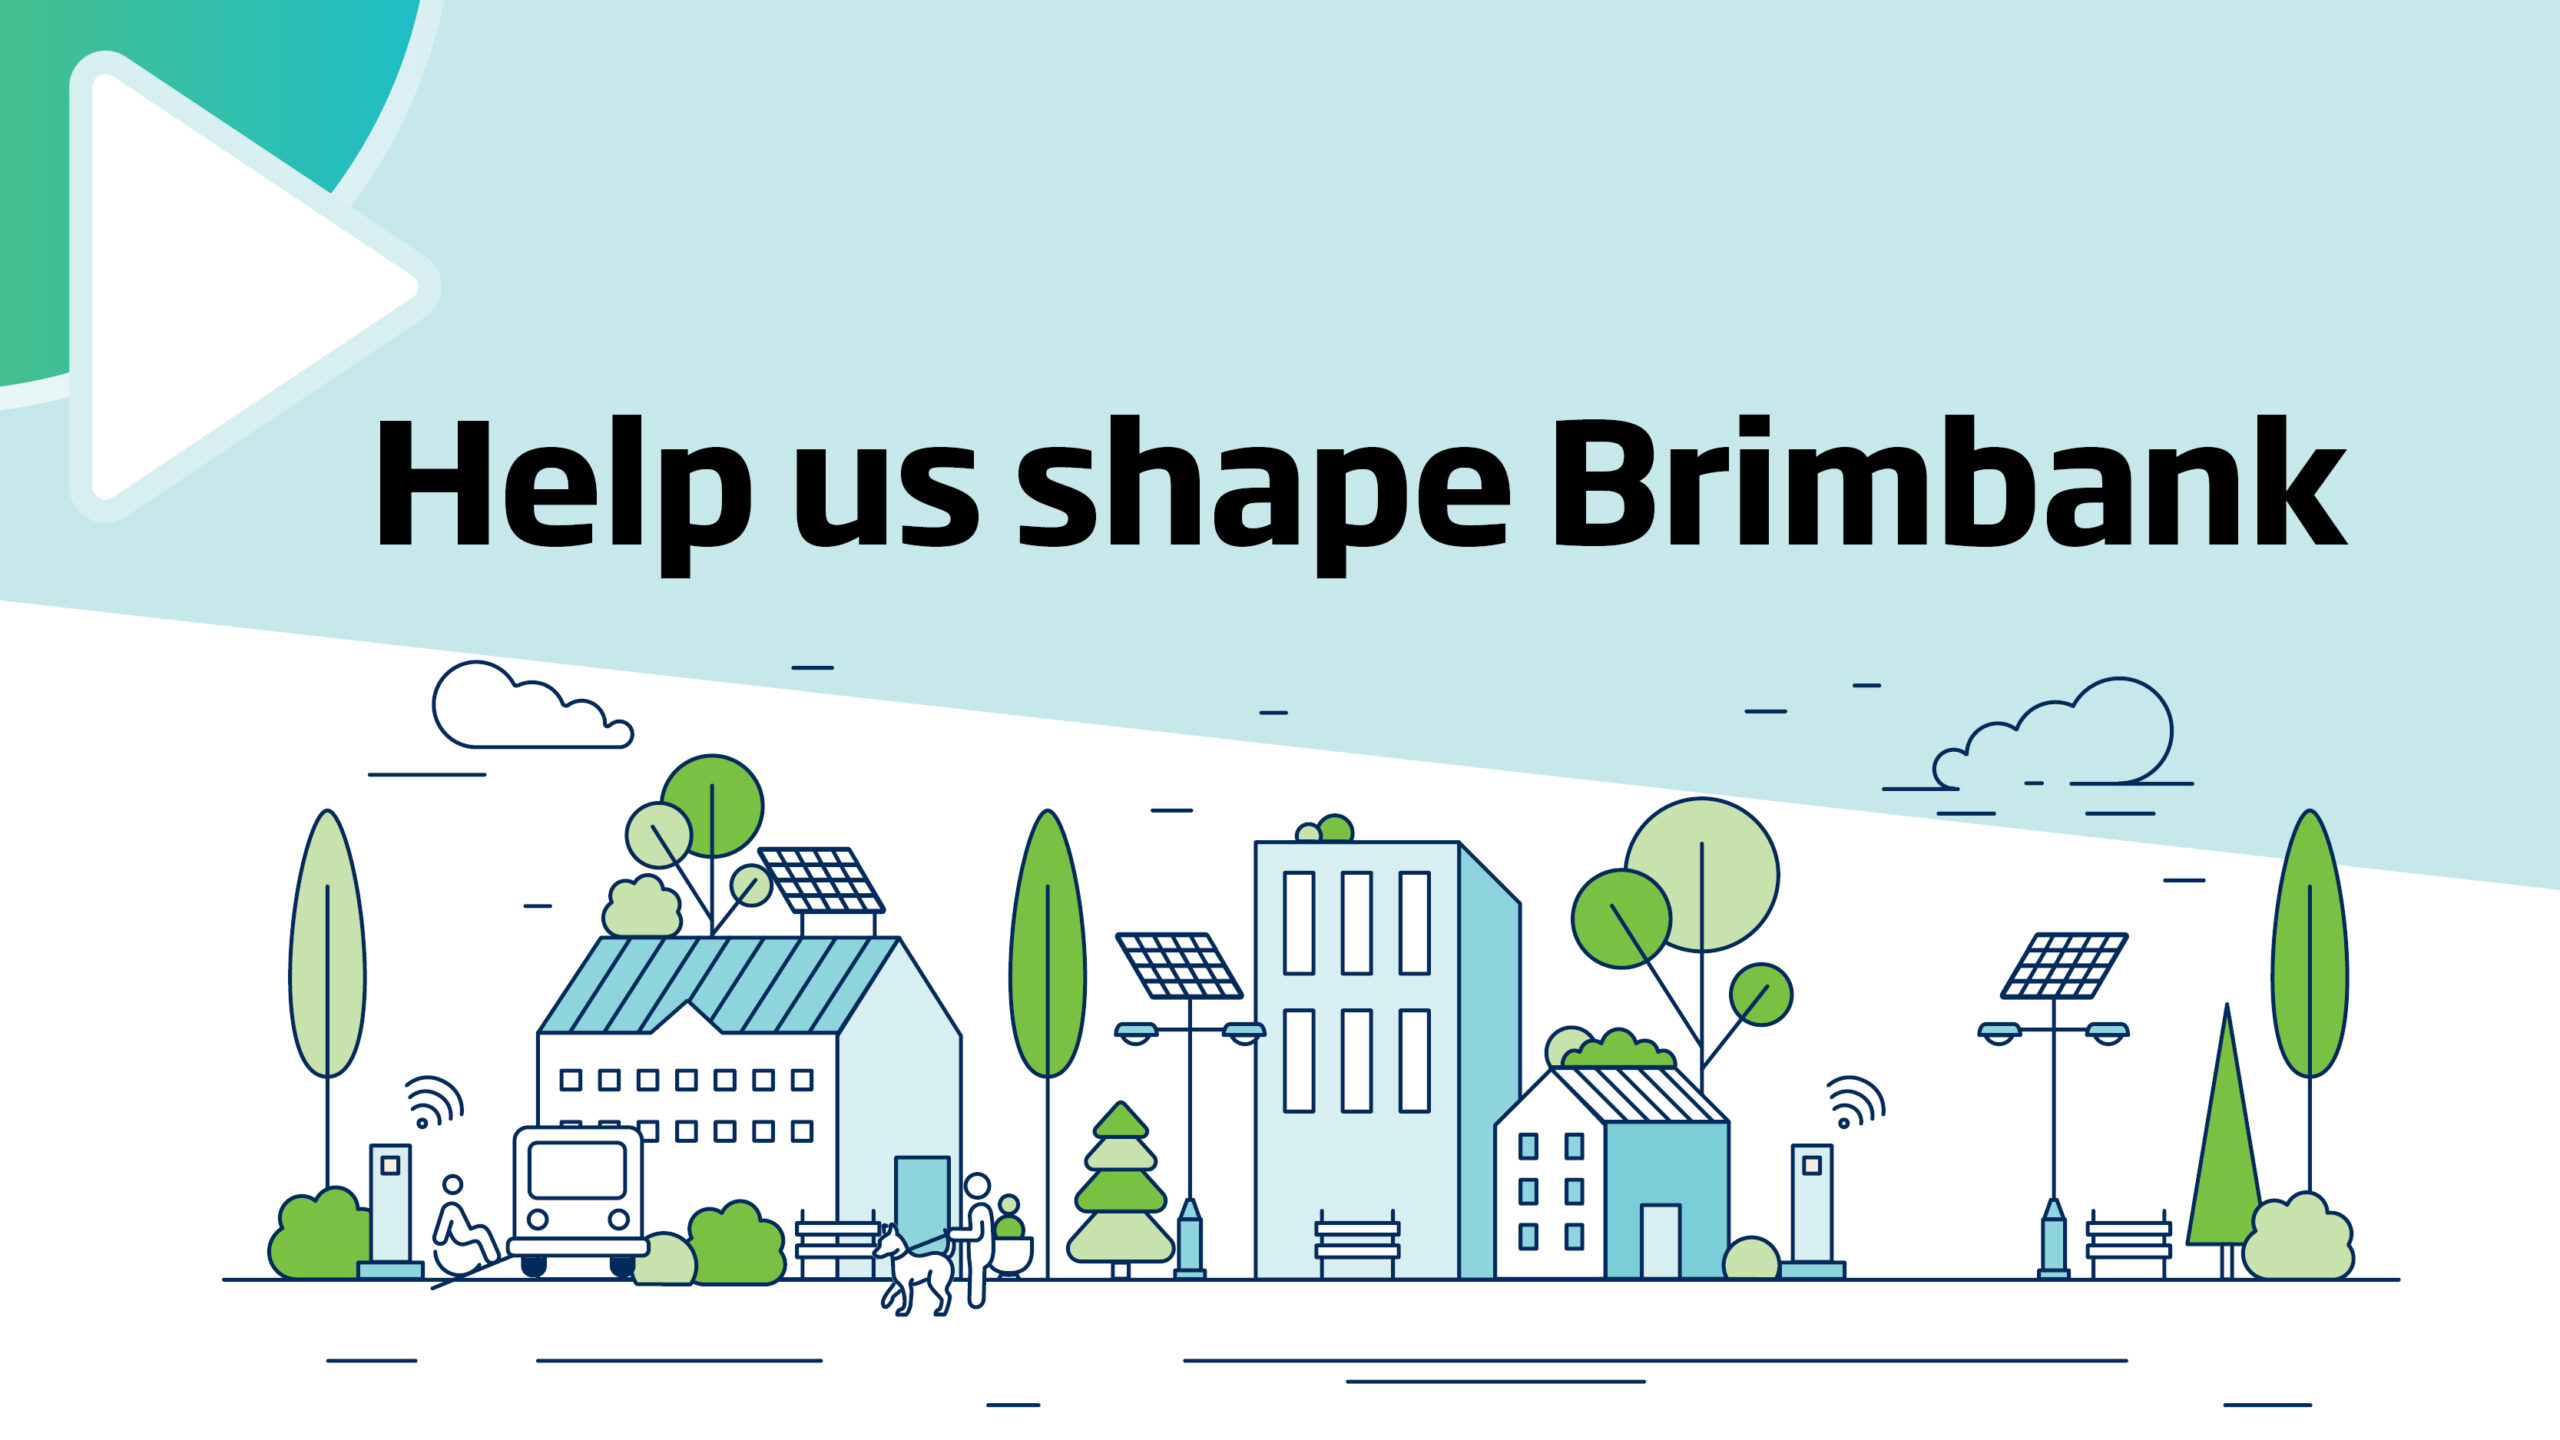 Have your say on Brimbank’s draft budget and action plan